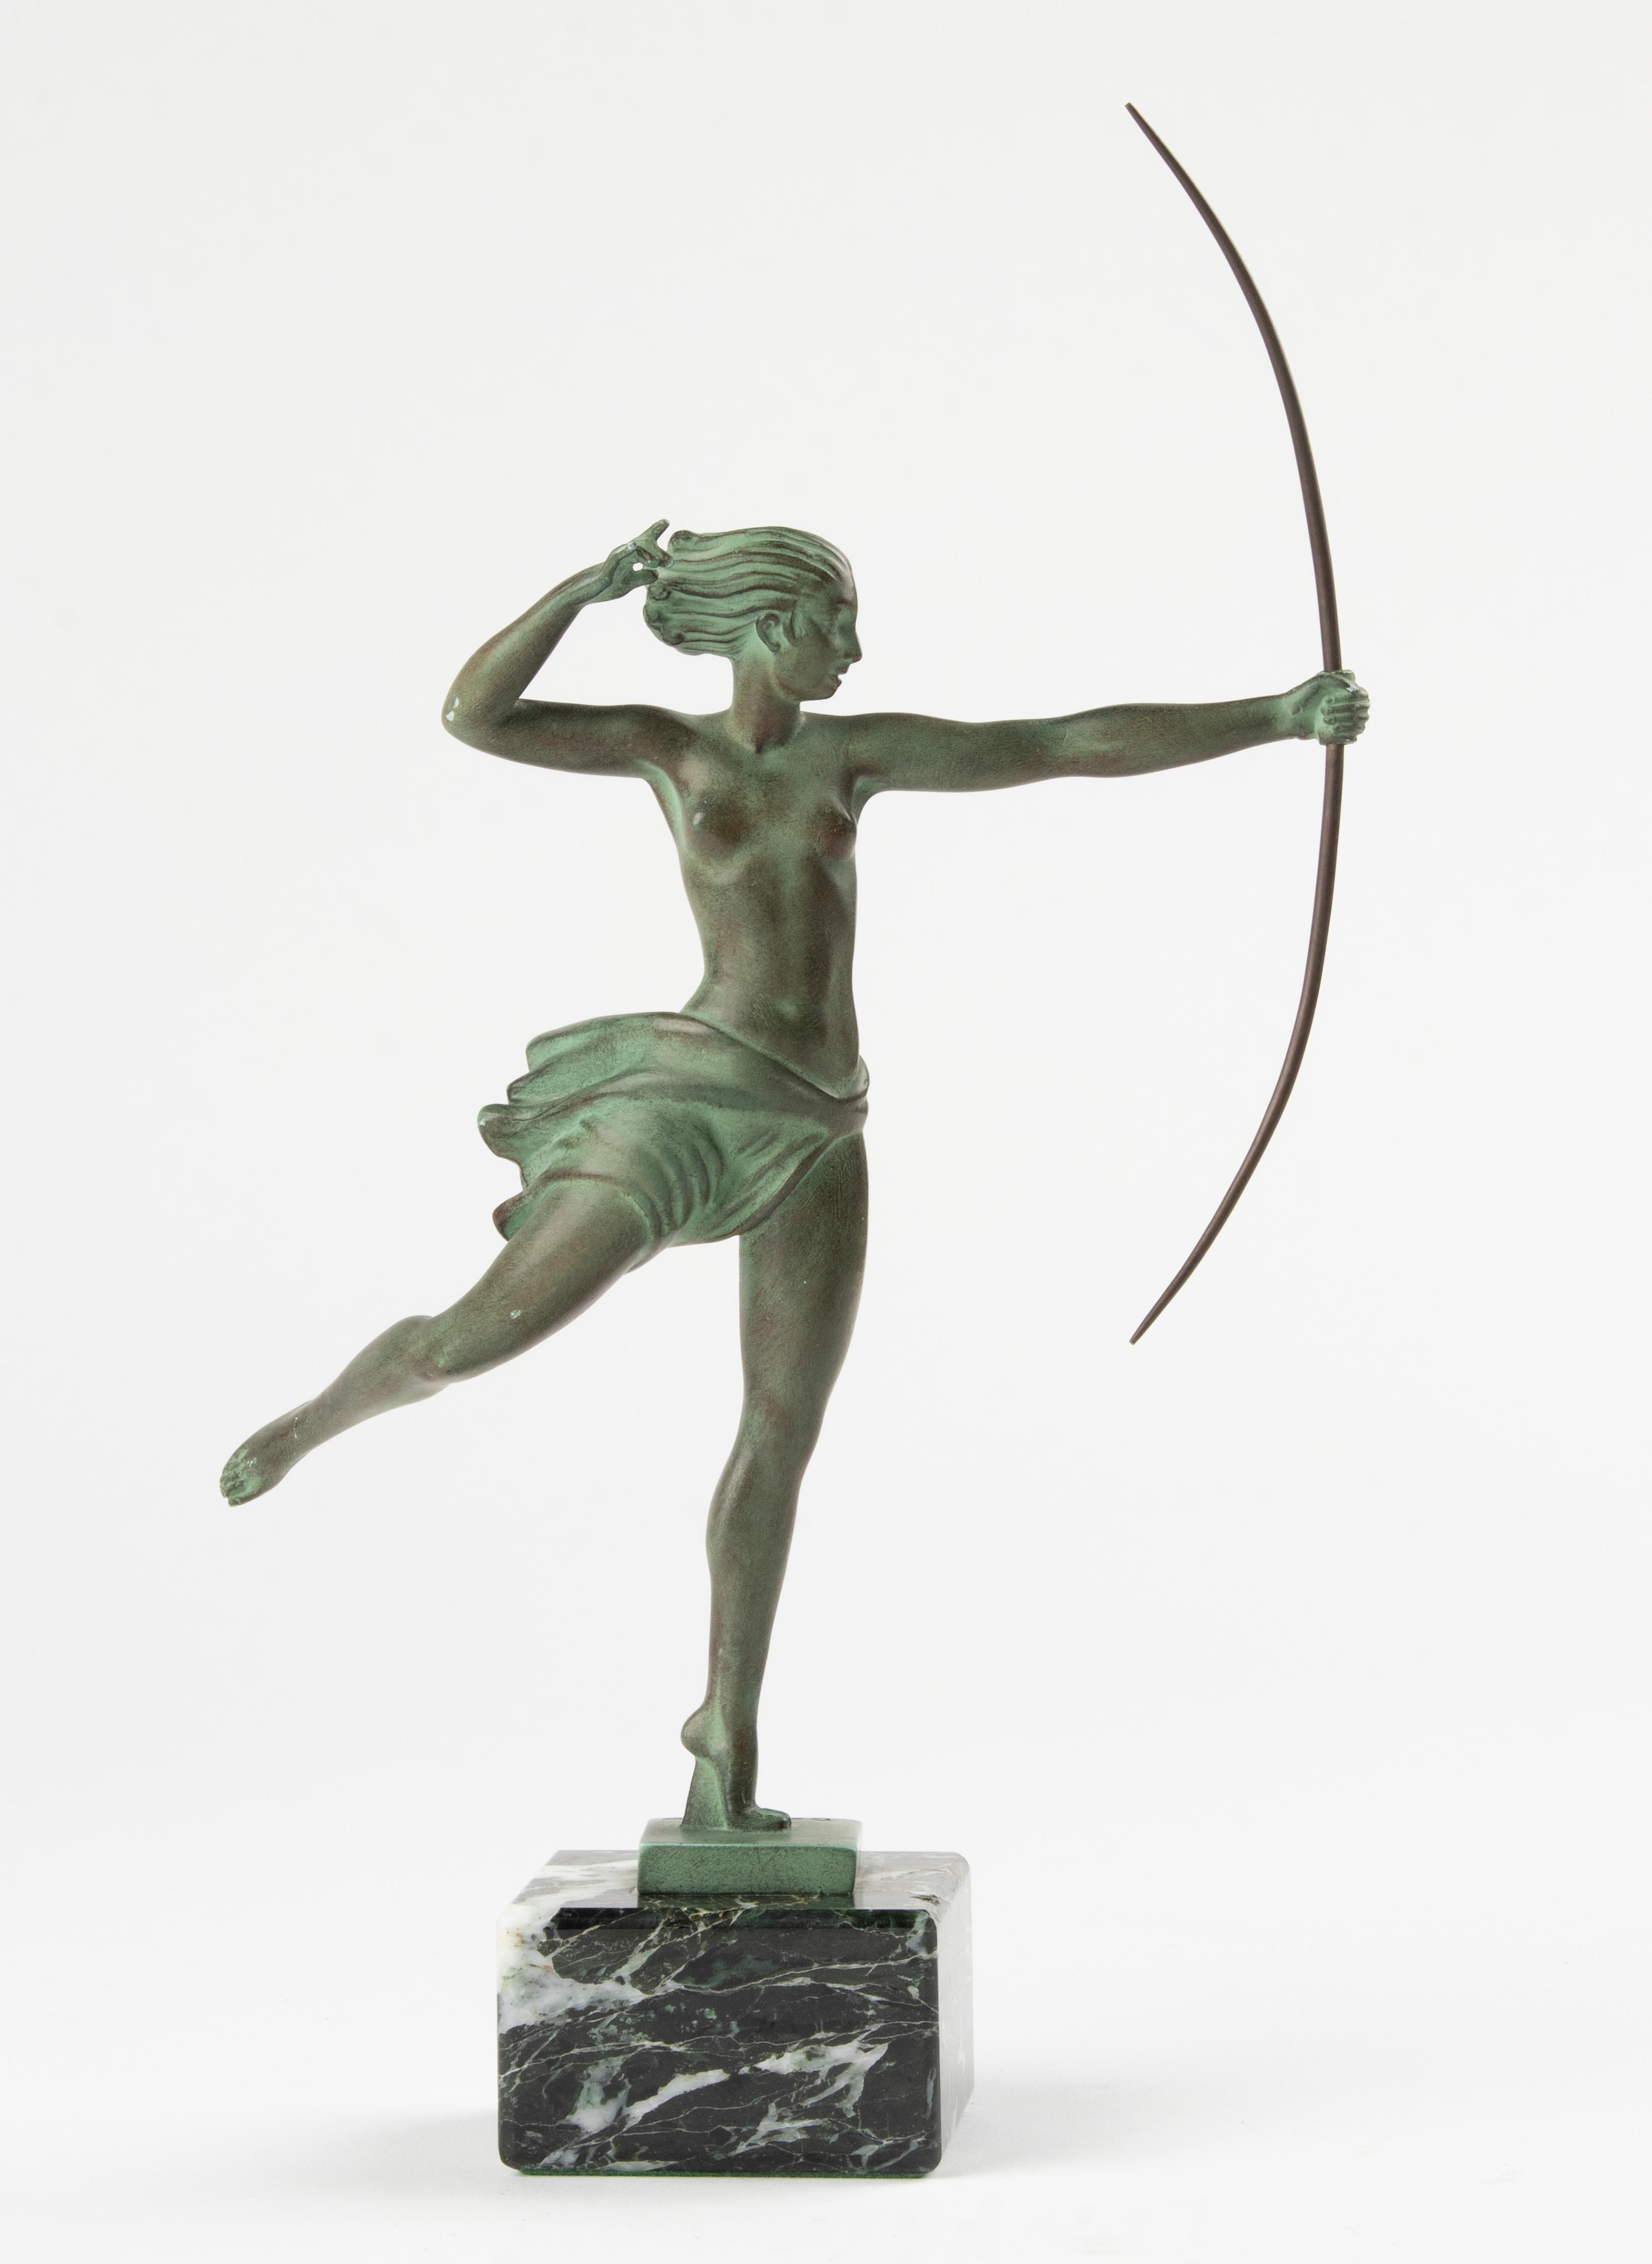 Hand-Crafted 1930's French Art Deco Sculpture by Jean de MarCo from Studio Max Le Verrier